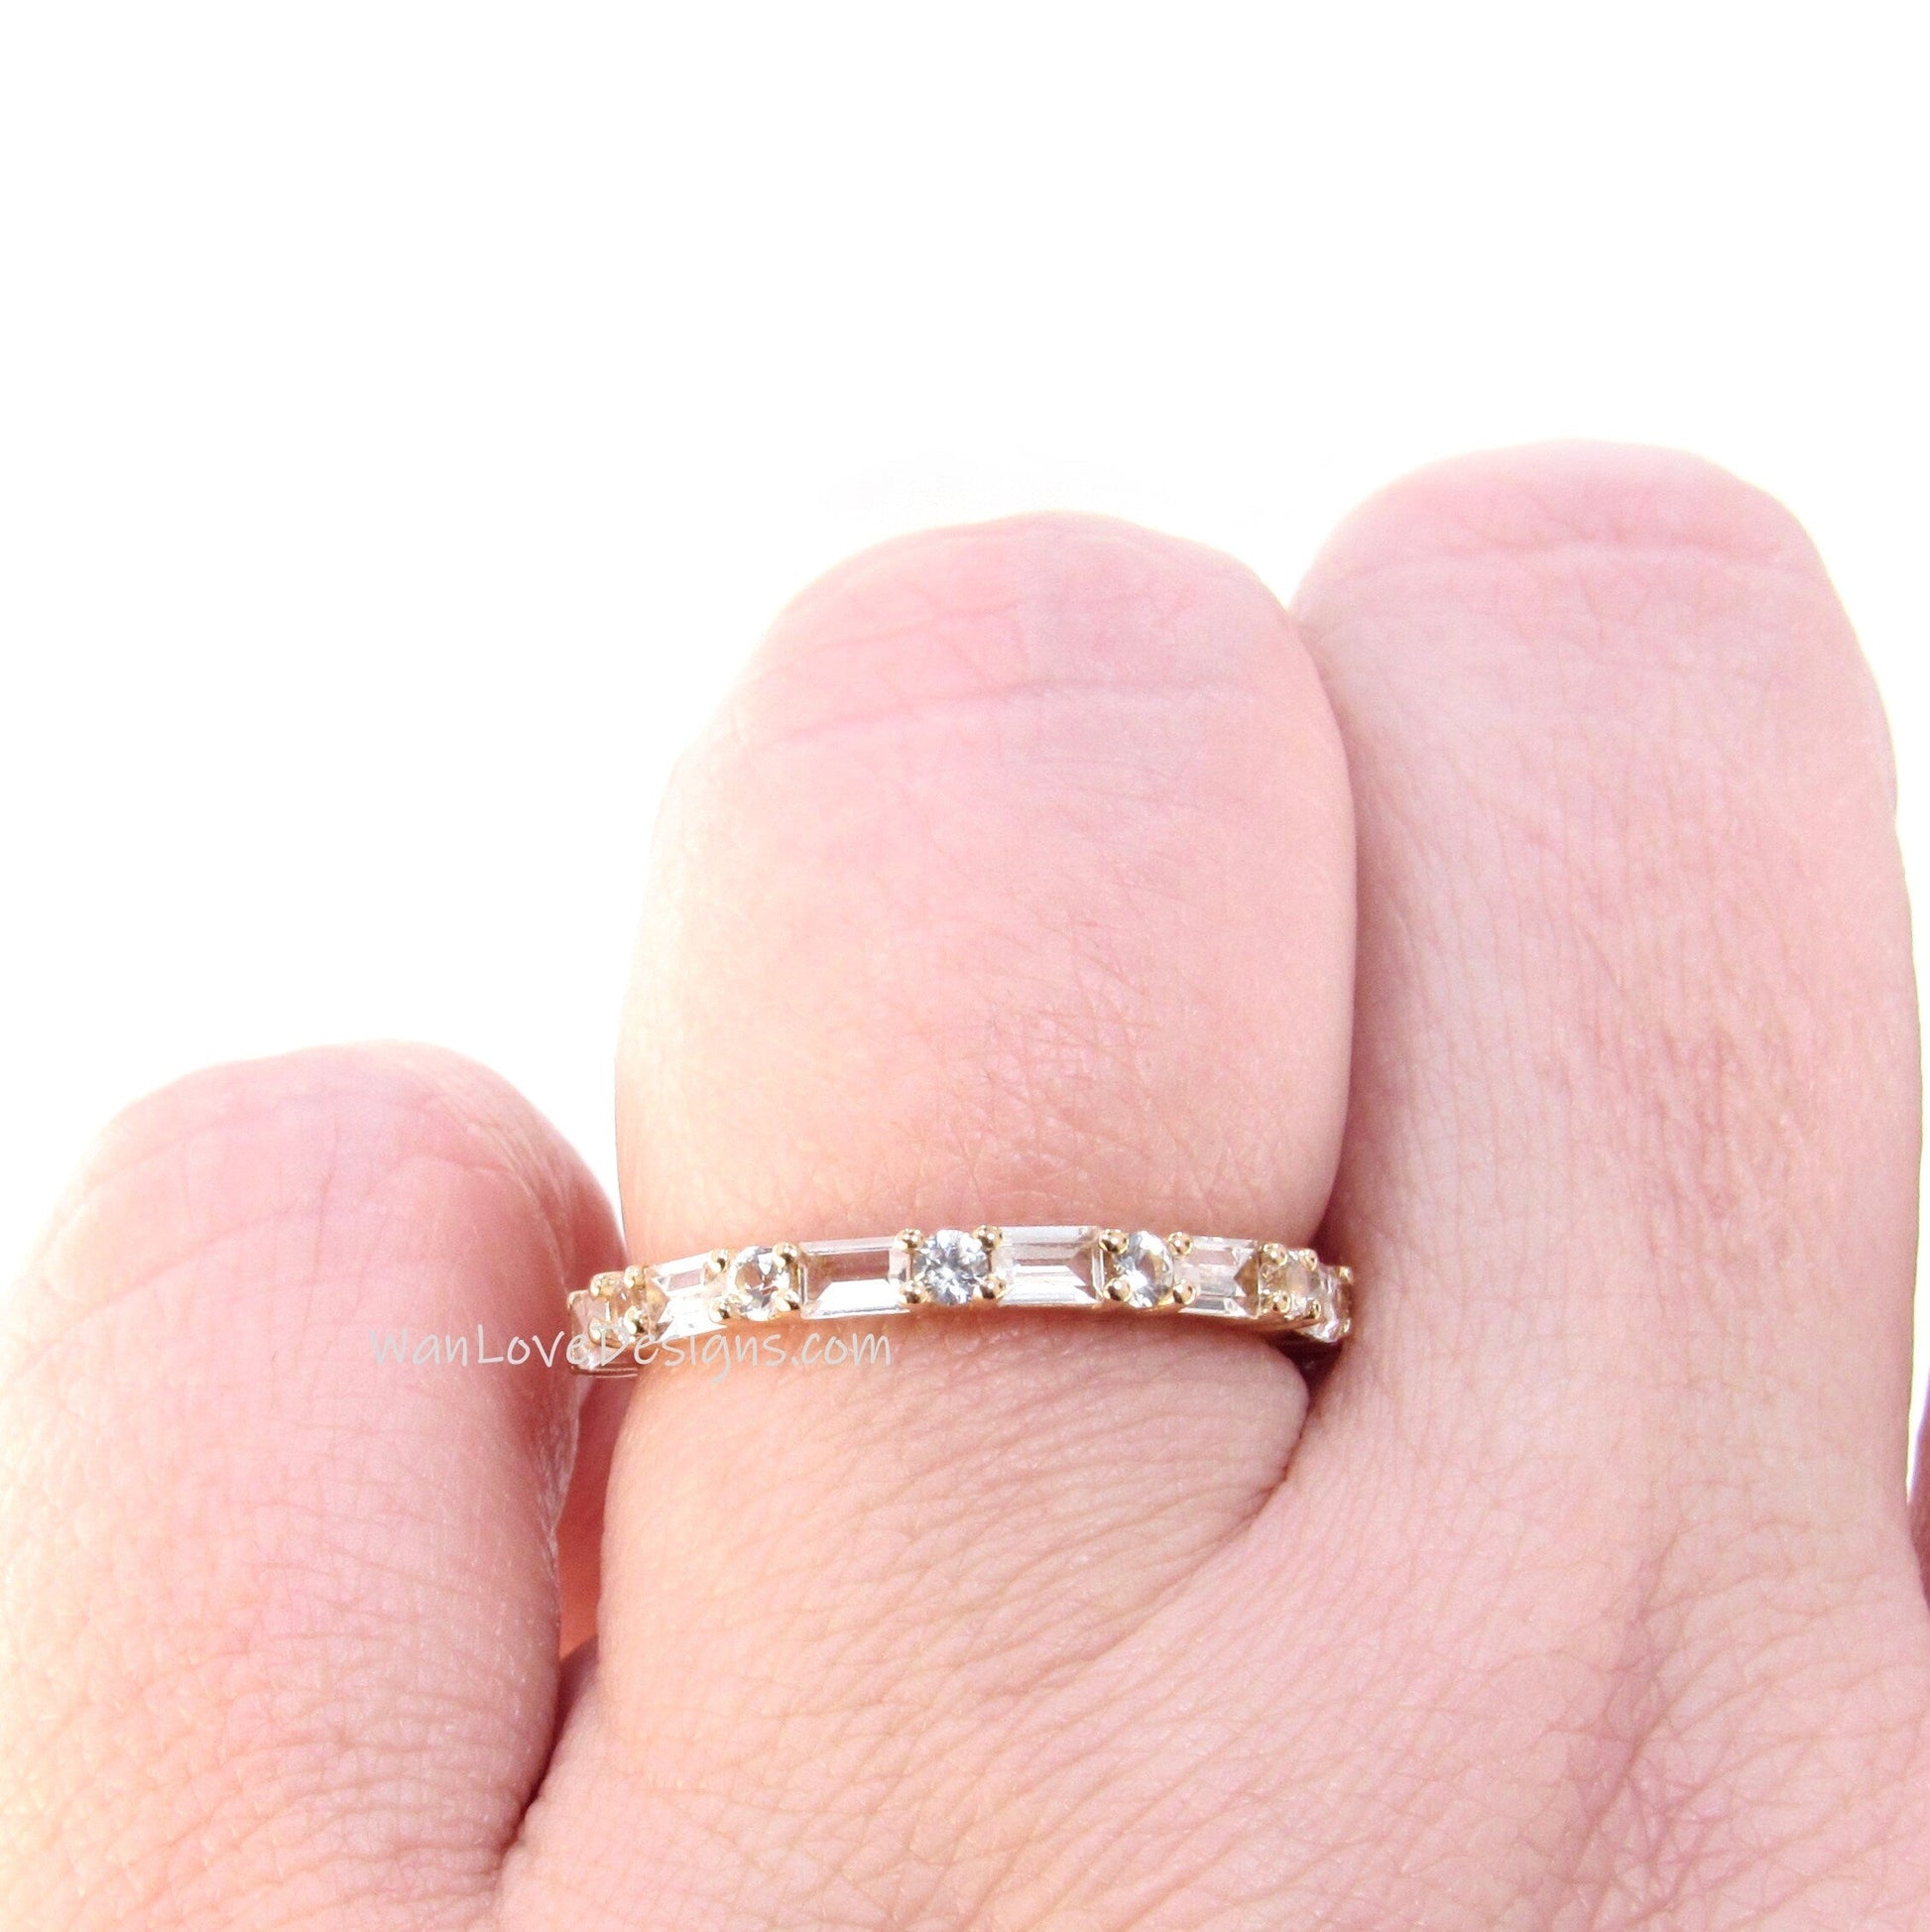 Baguette Round Almost Eternity Ring • Diamond 3/4 Eternity Ring • Dash Dot Engagement Ring in Rose Gold • Moissanite Matching Wedding Band Wan Love Designs